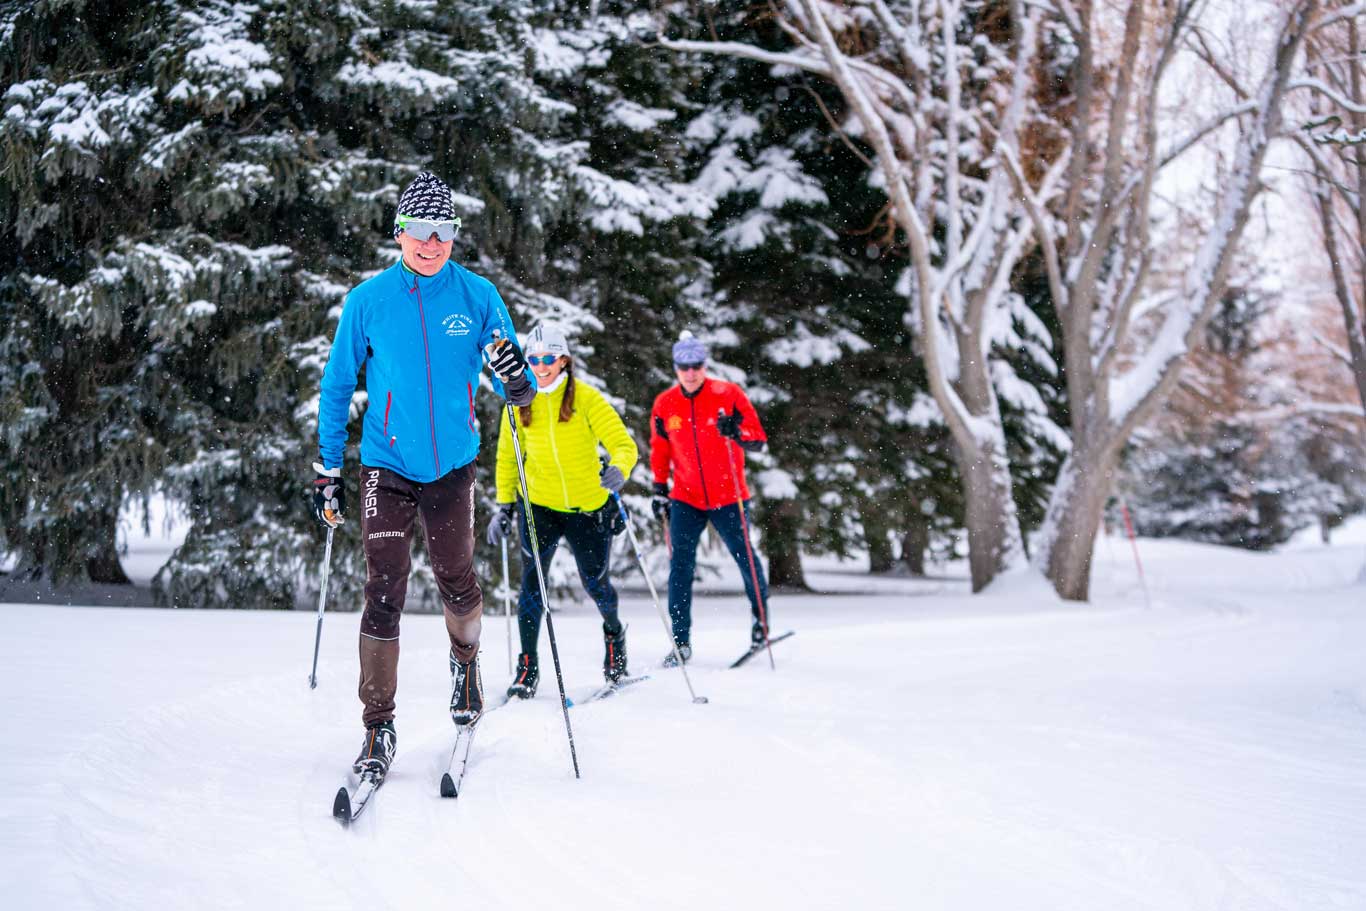 Three classic Nordic skiers on the White Pine Nordic track in Park City, UT.